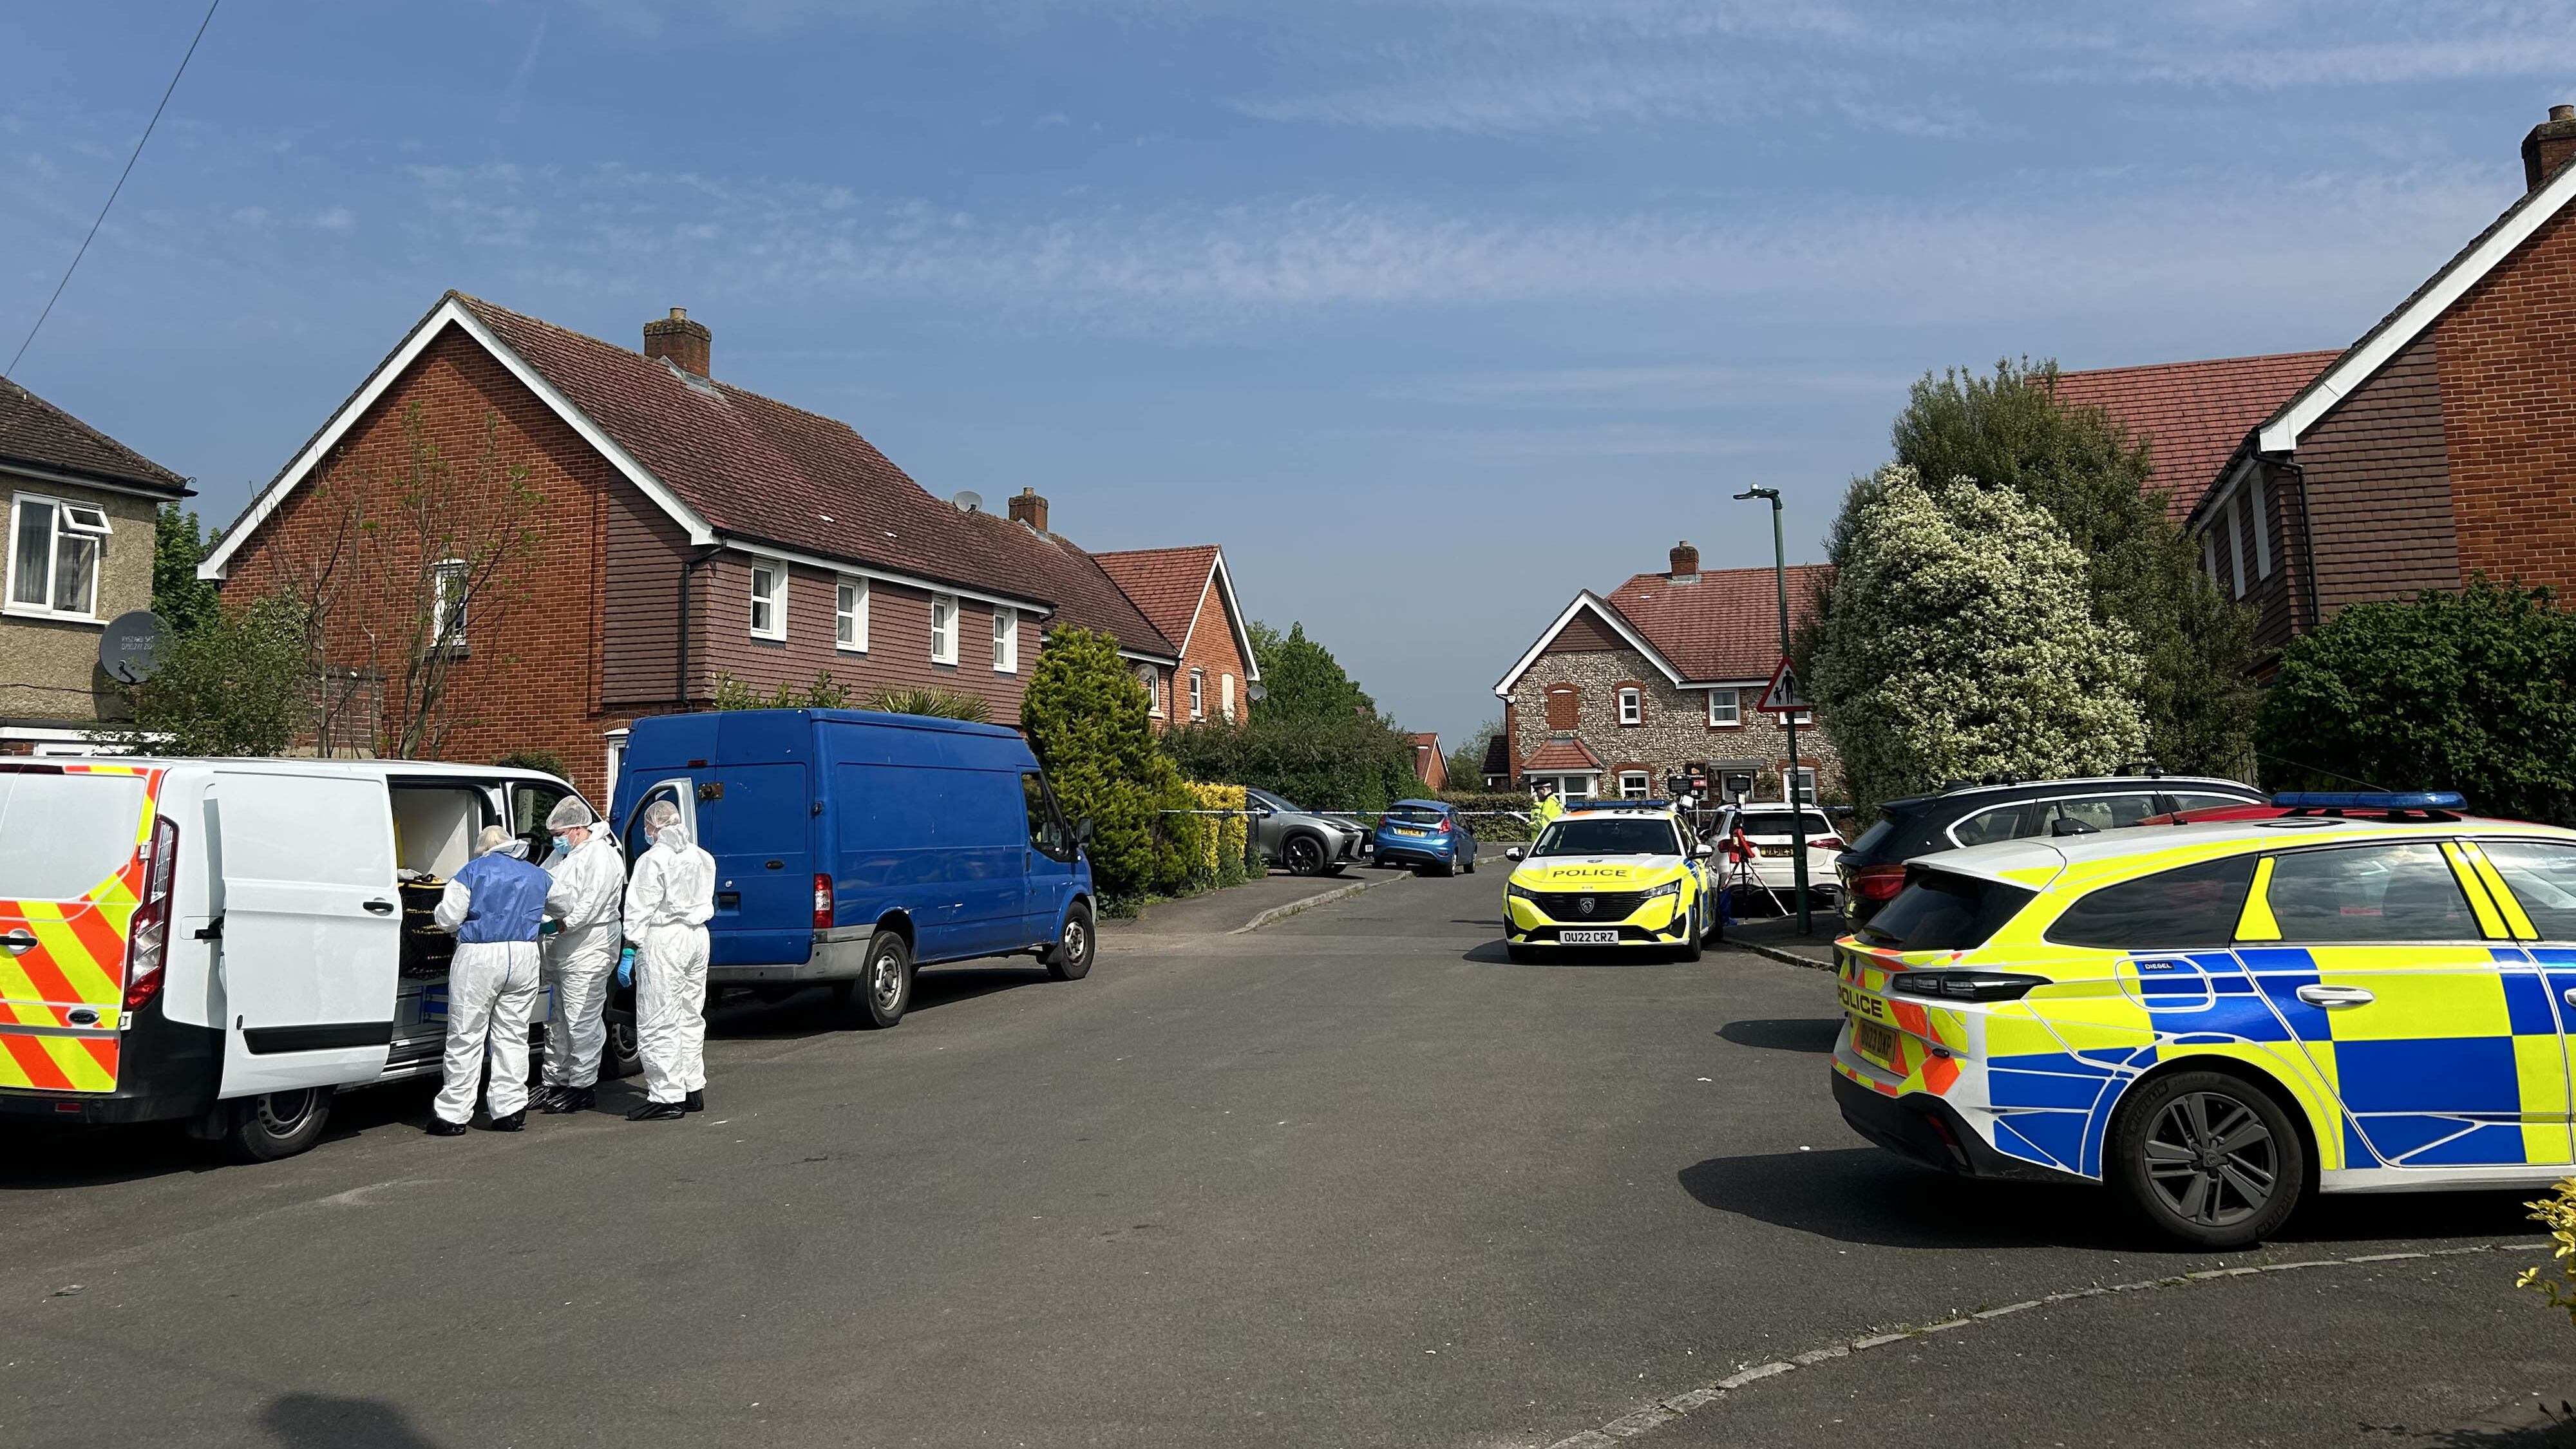 Police and forensics teams attended the scene after the incident